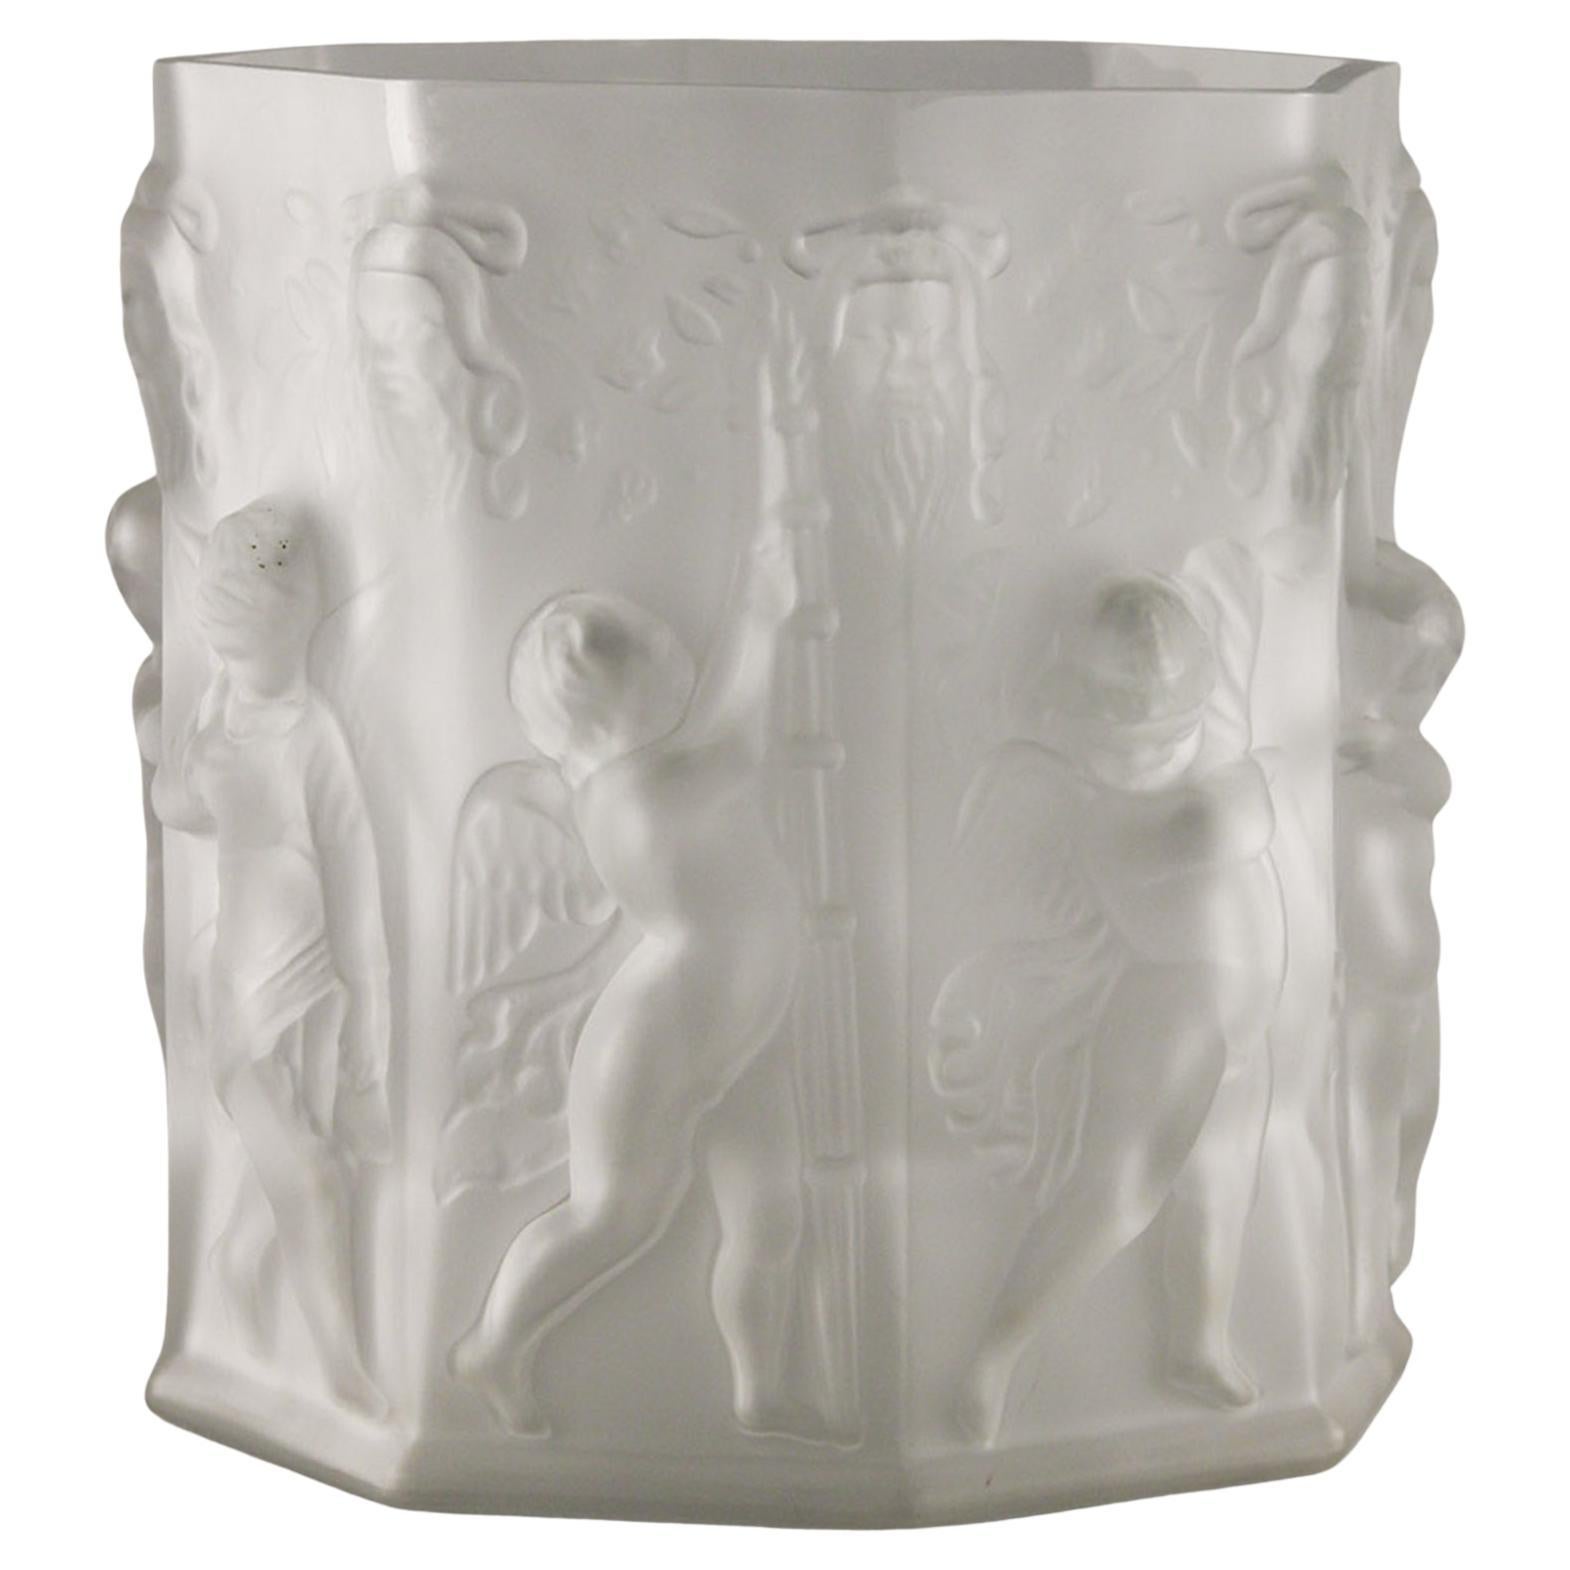 Early 20th C. French Octagonal Frosted Glass Vase Centerpiece with Cherubs For Sale